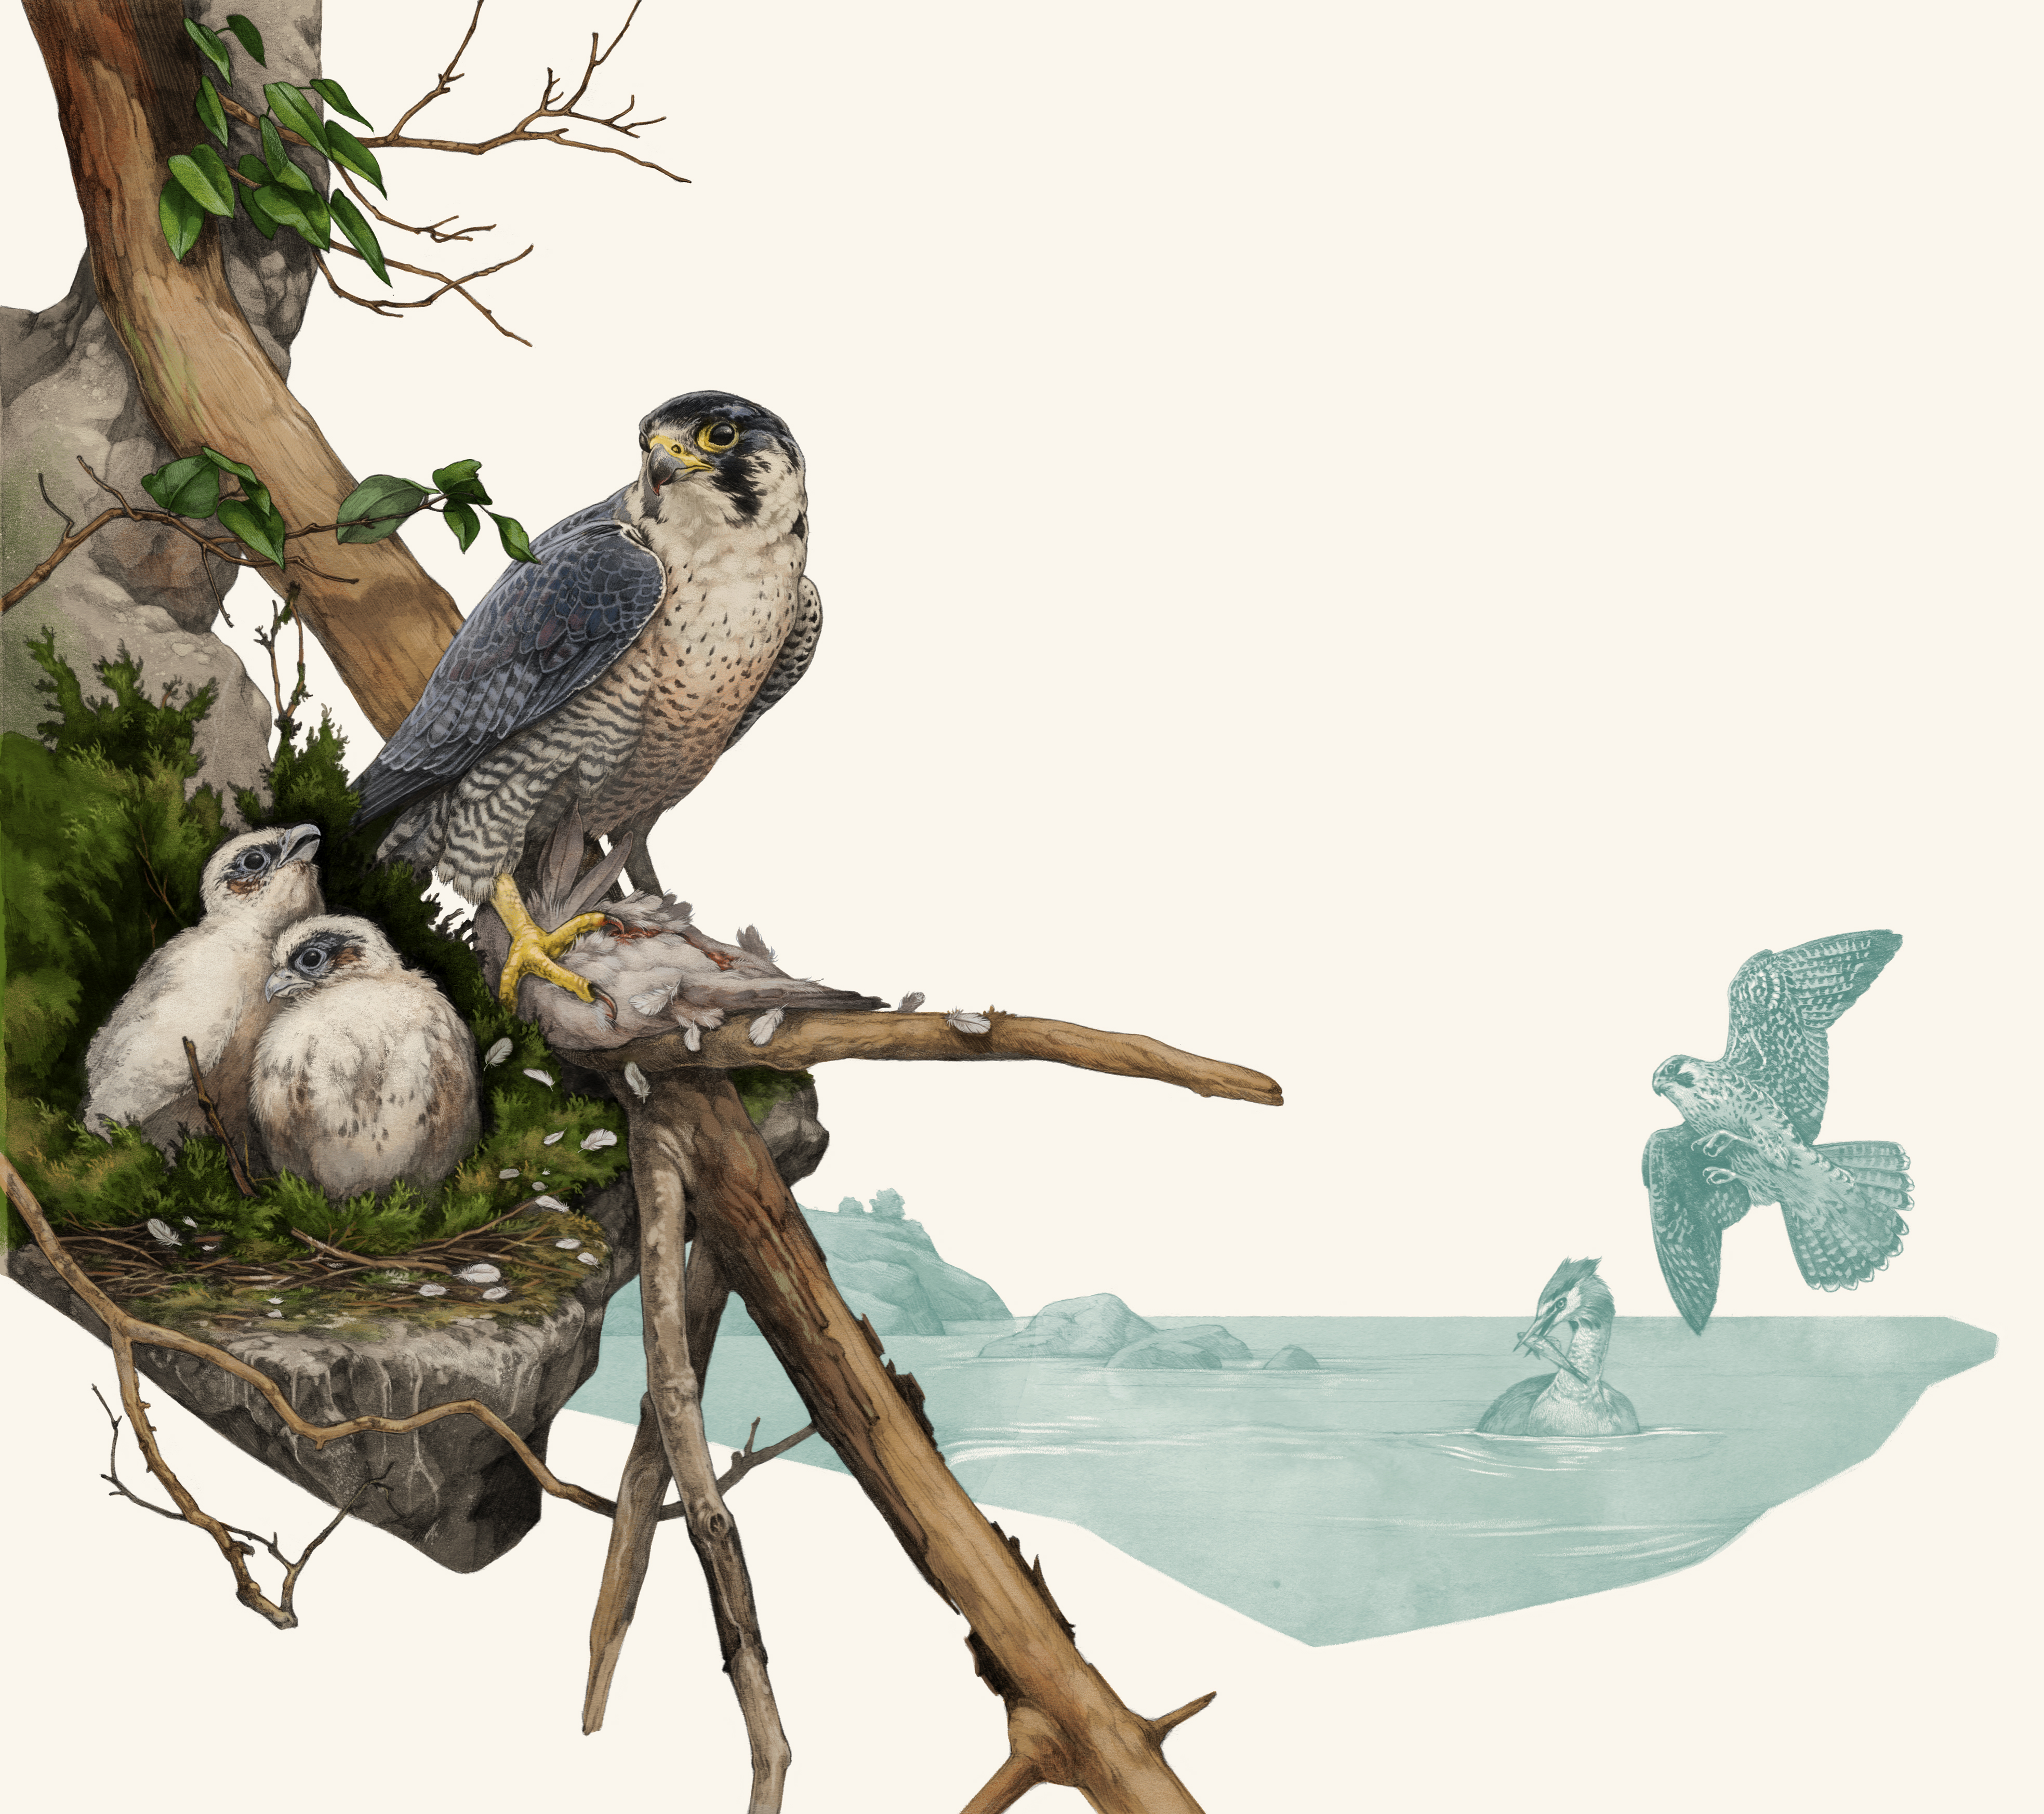 a peregrine falcon sits on a branch next to a nest with two young birds sitting in the nest.